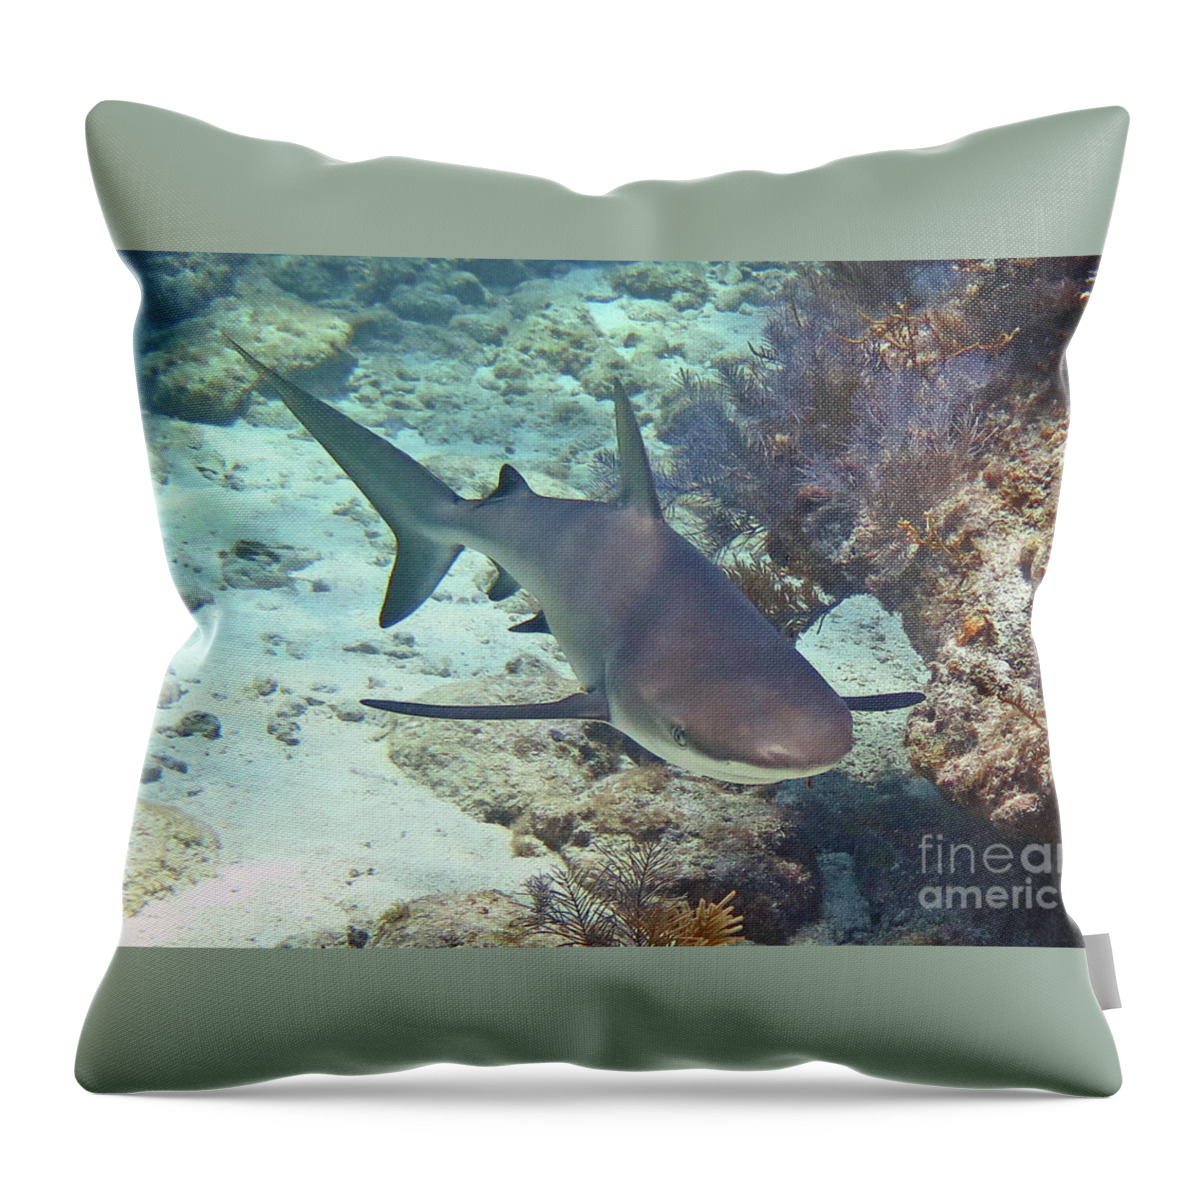 Underwater Throw Pillow featuring the photograph Reef Shark 2 by Daryl Duda